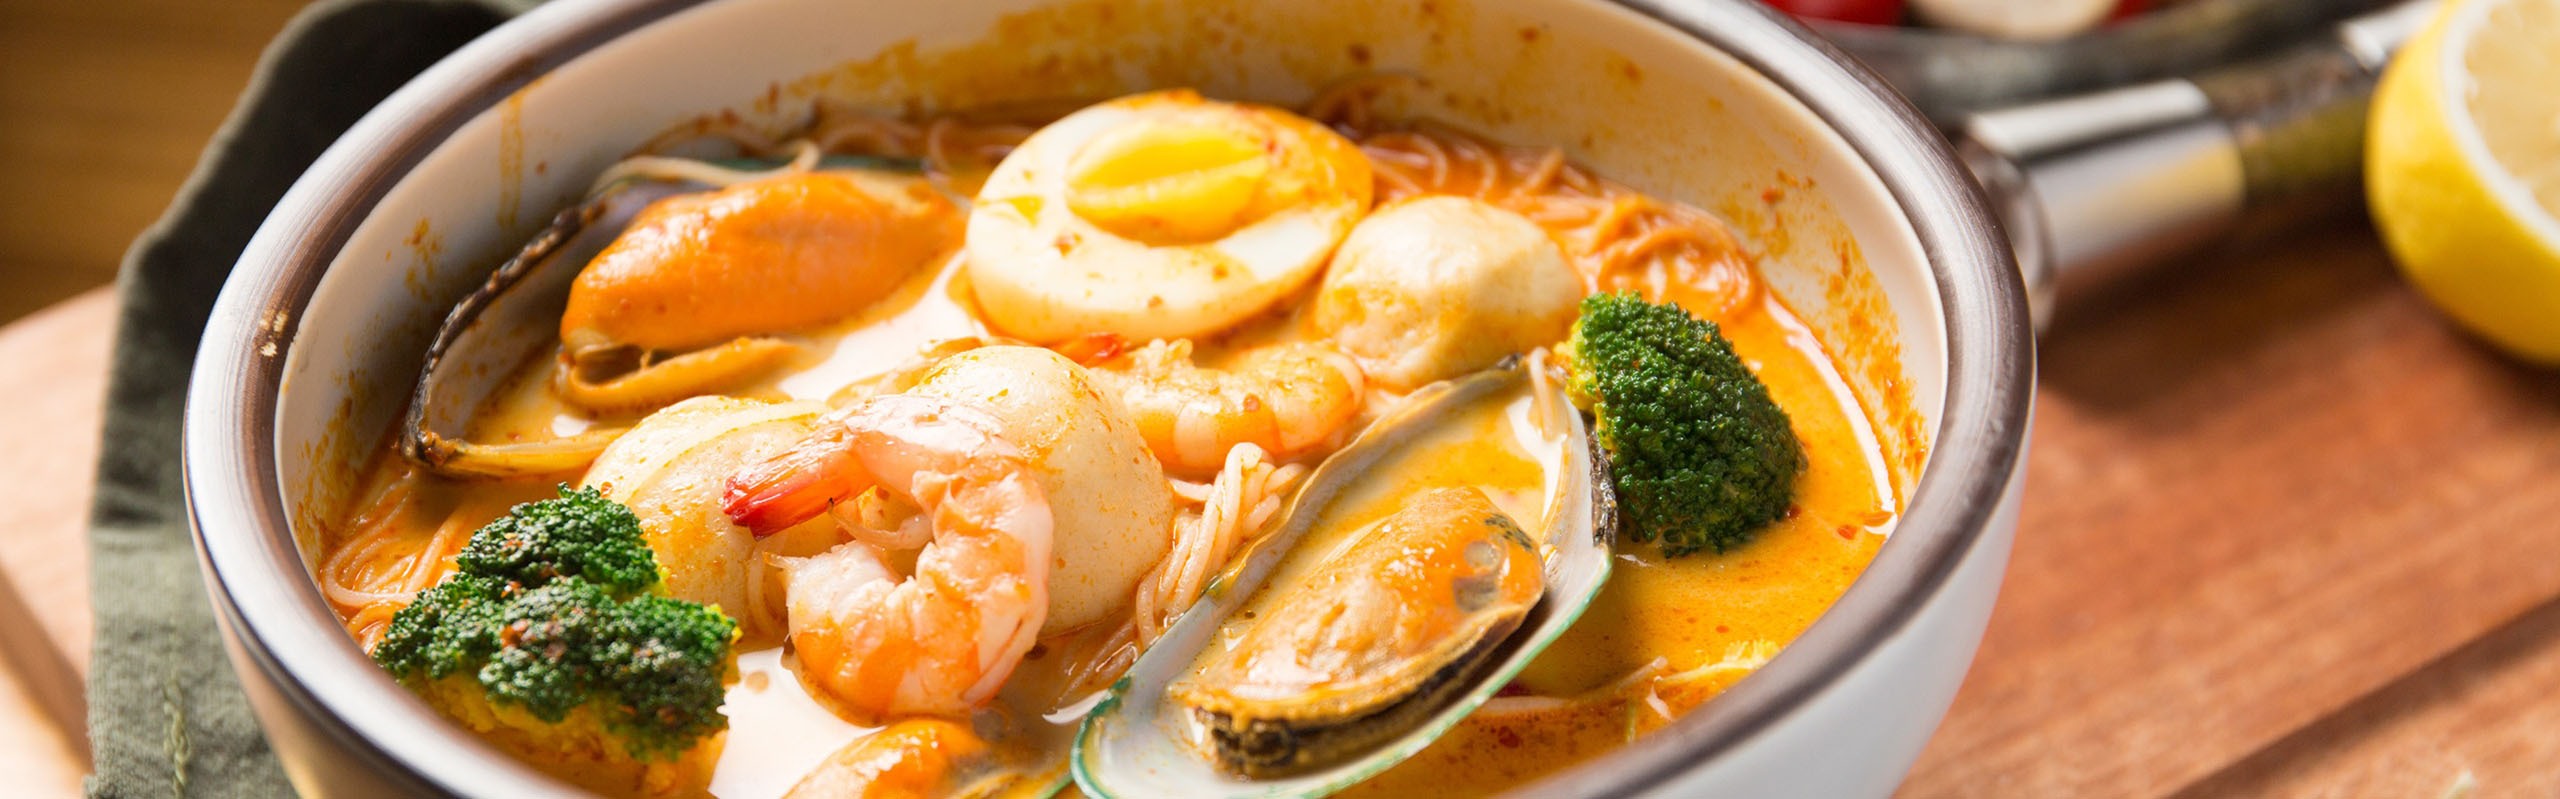 17 of the Best Thai Foods & Dishes You Absolutely Have to Try